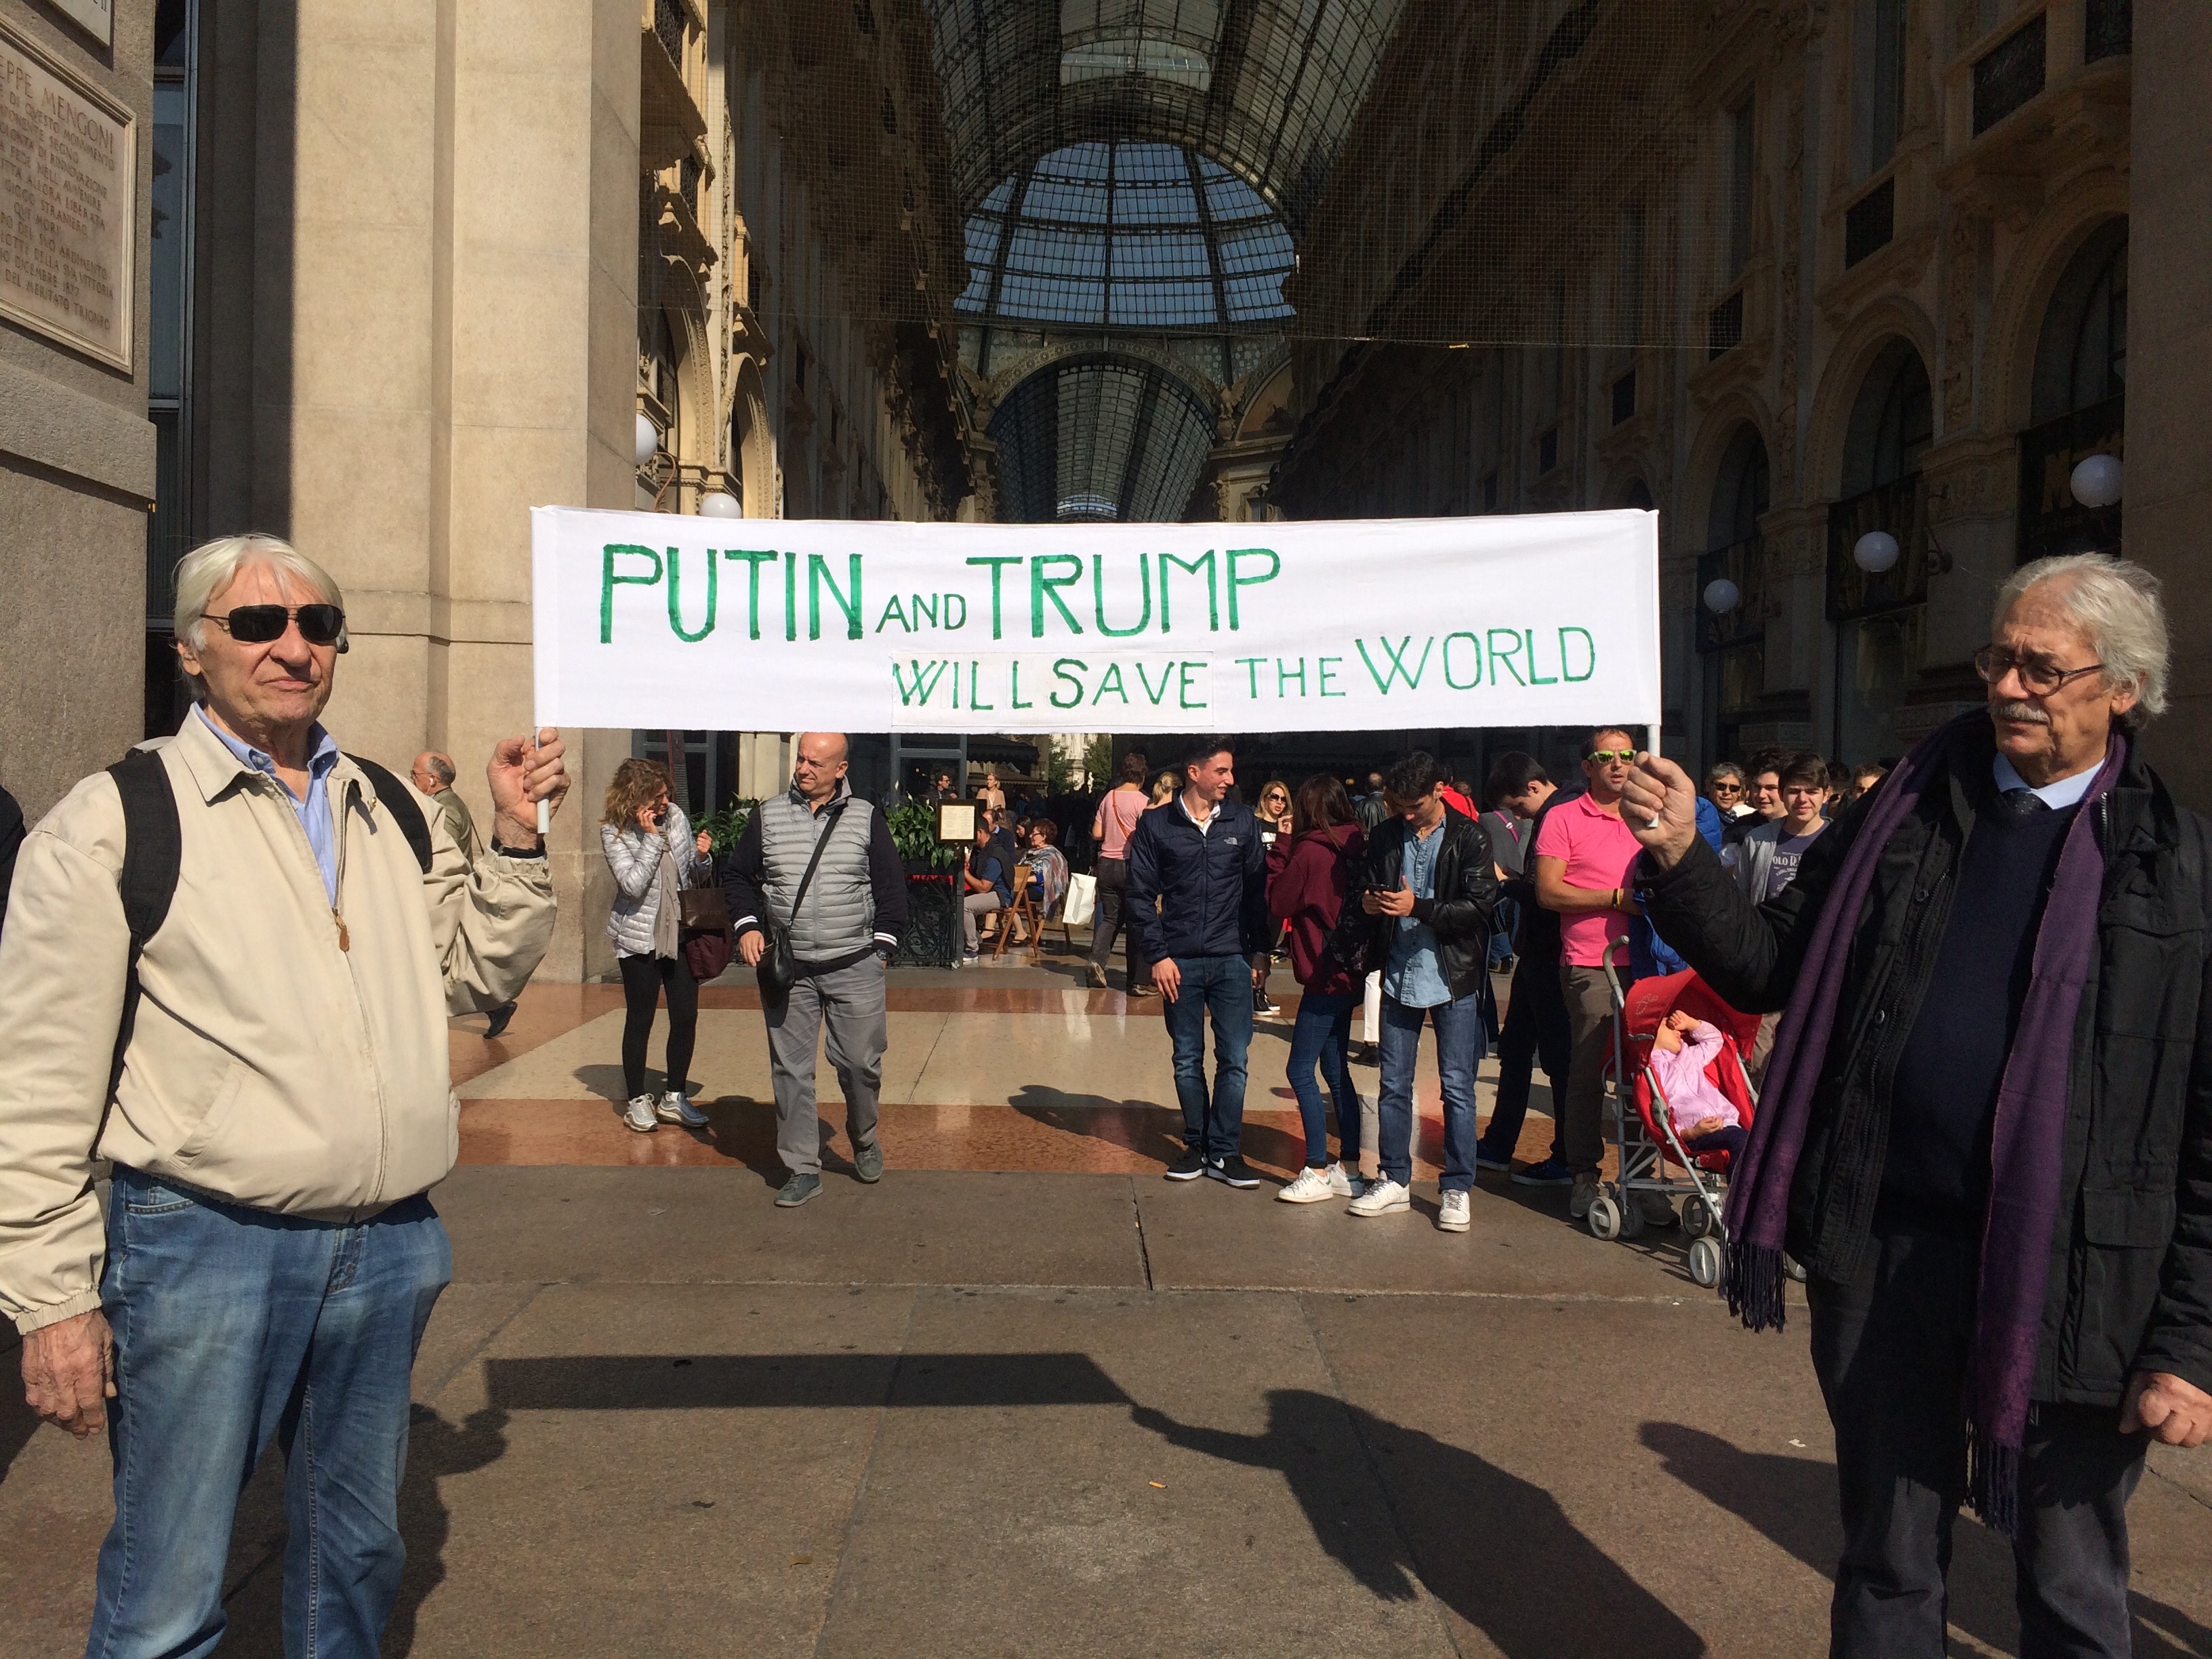 Vladimir Putin and Donald Trump supporters are seen on October 7, 2016 in Milan, Italy. (Getty)